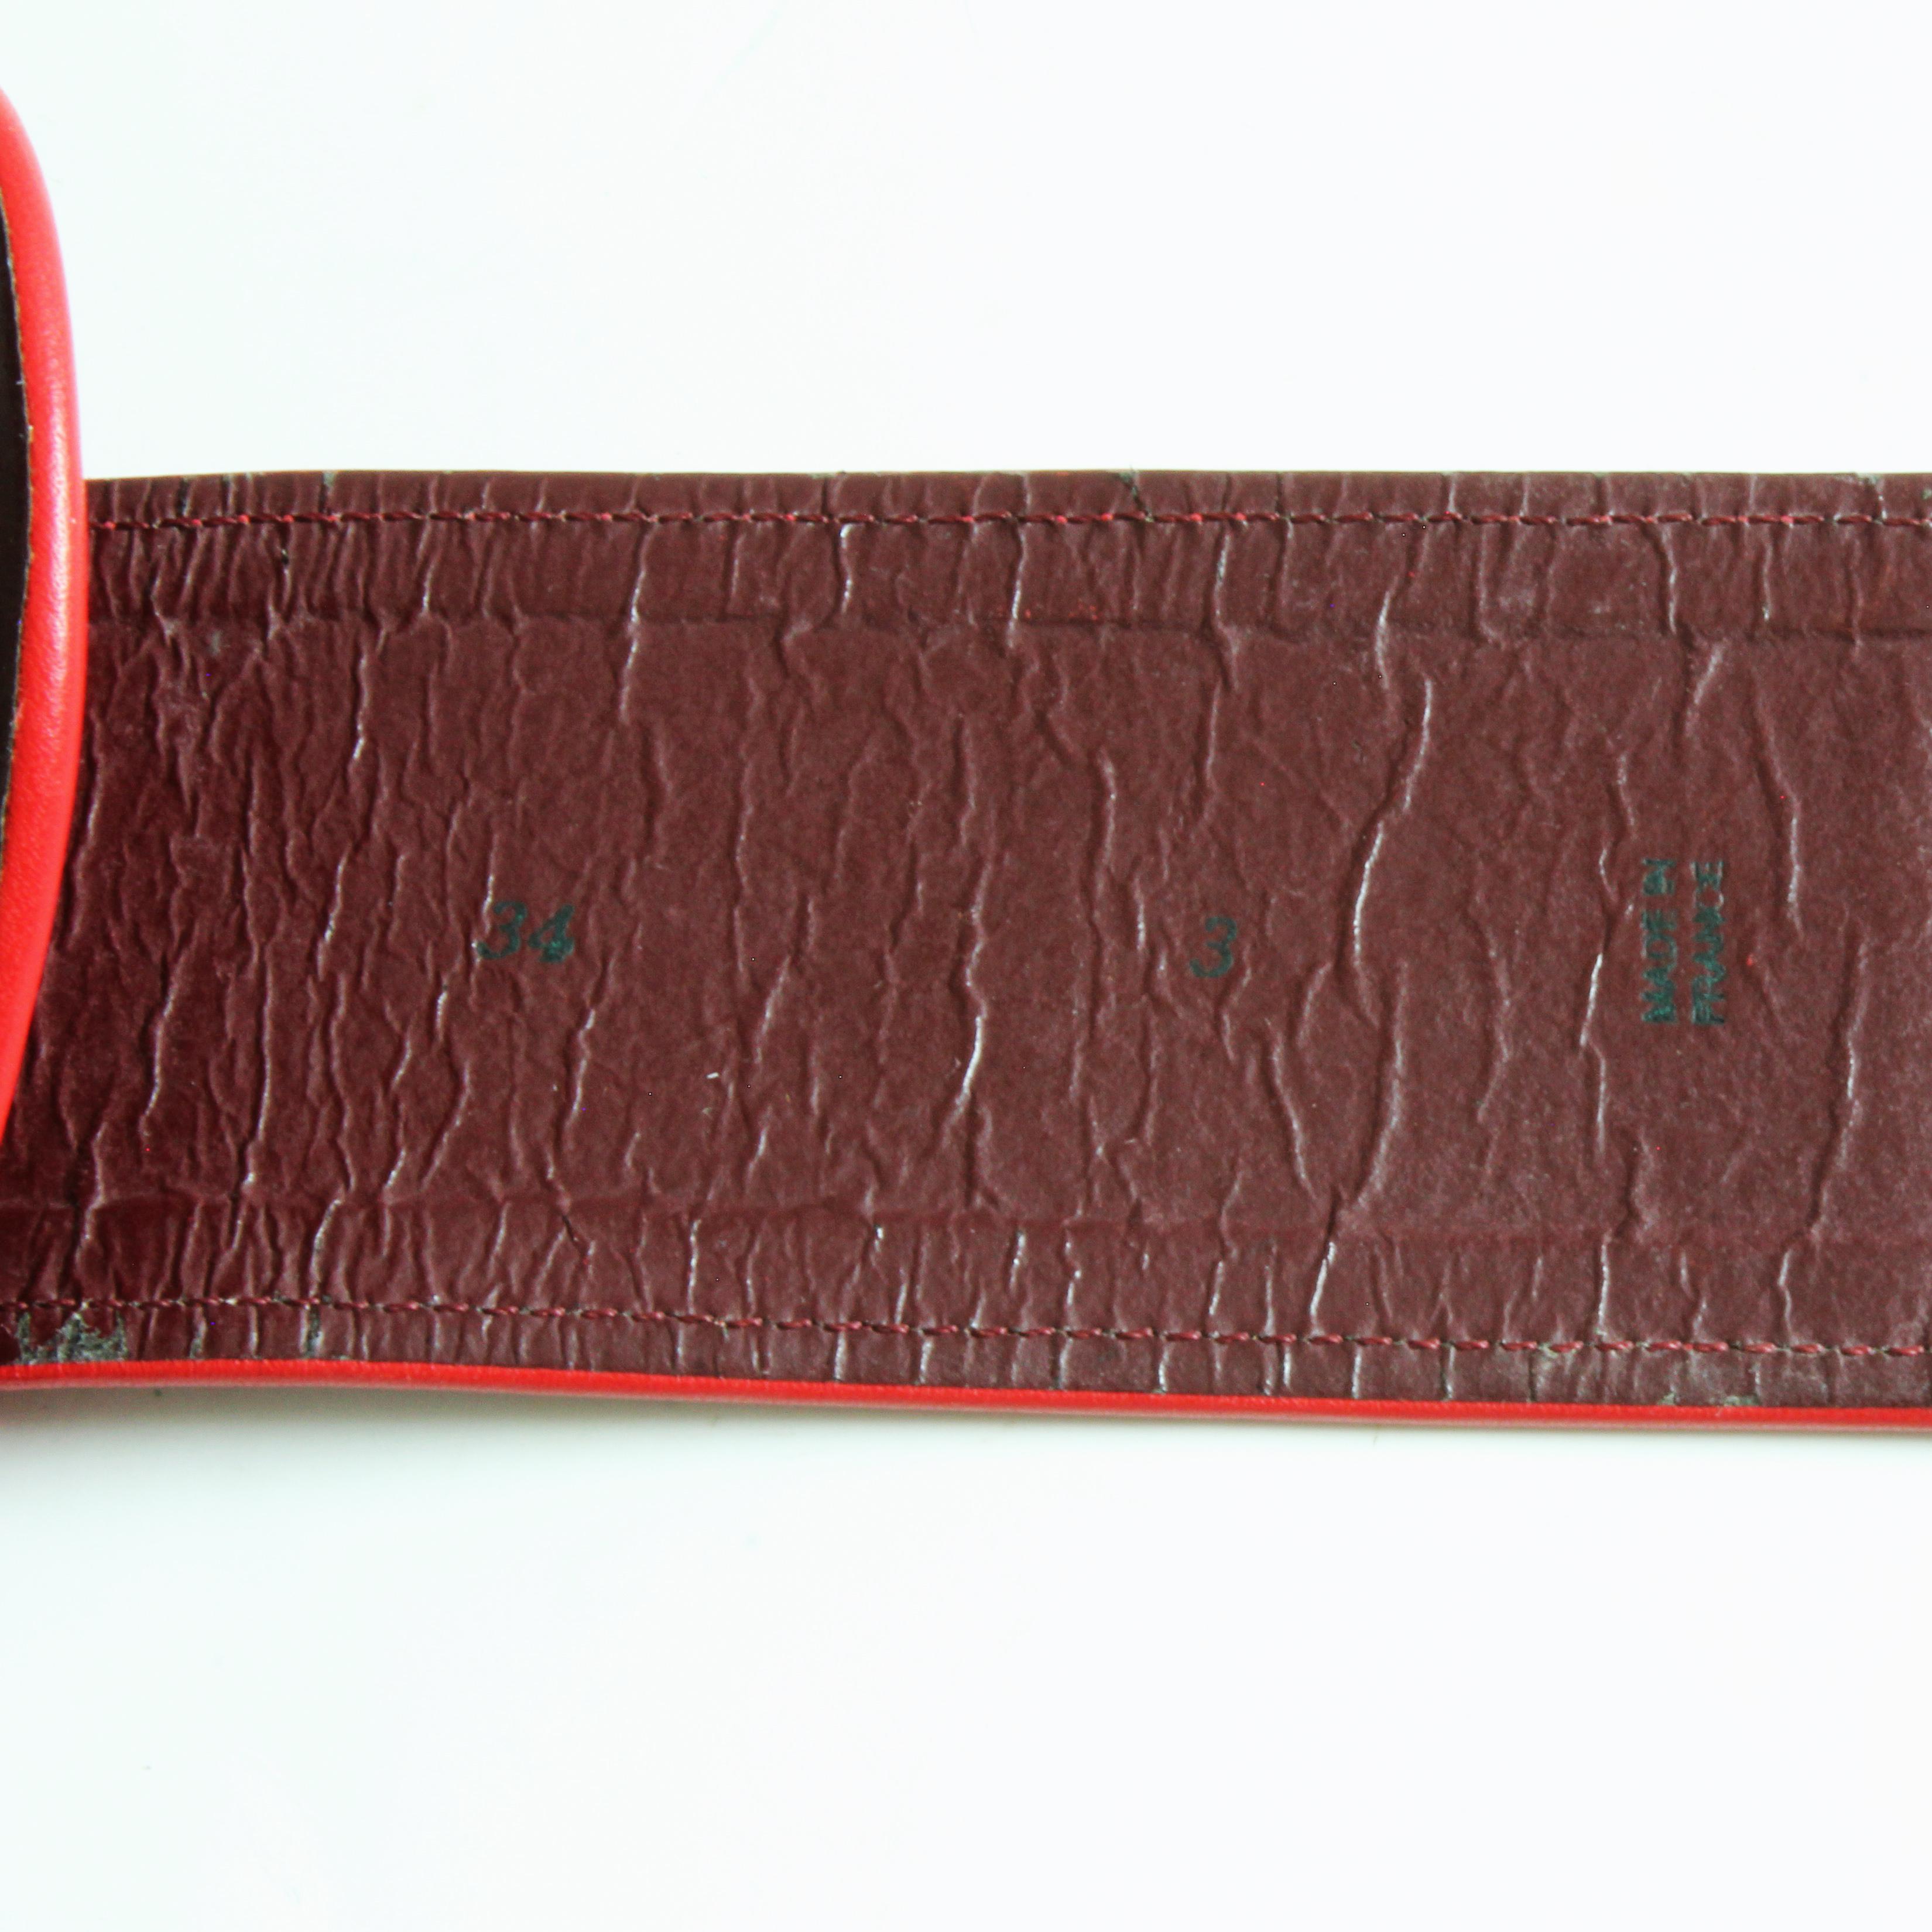 Yves Saint Laurent Wide Belt YSL Rive Gauche Red Leather Heart Vintage 70s Rare For Sale 5